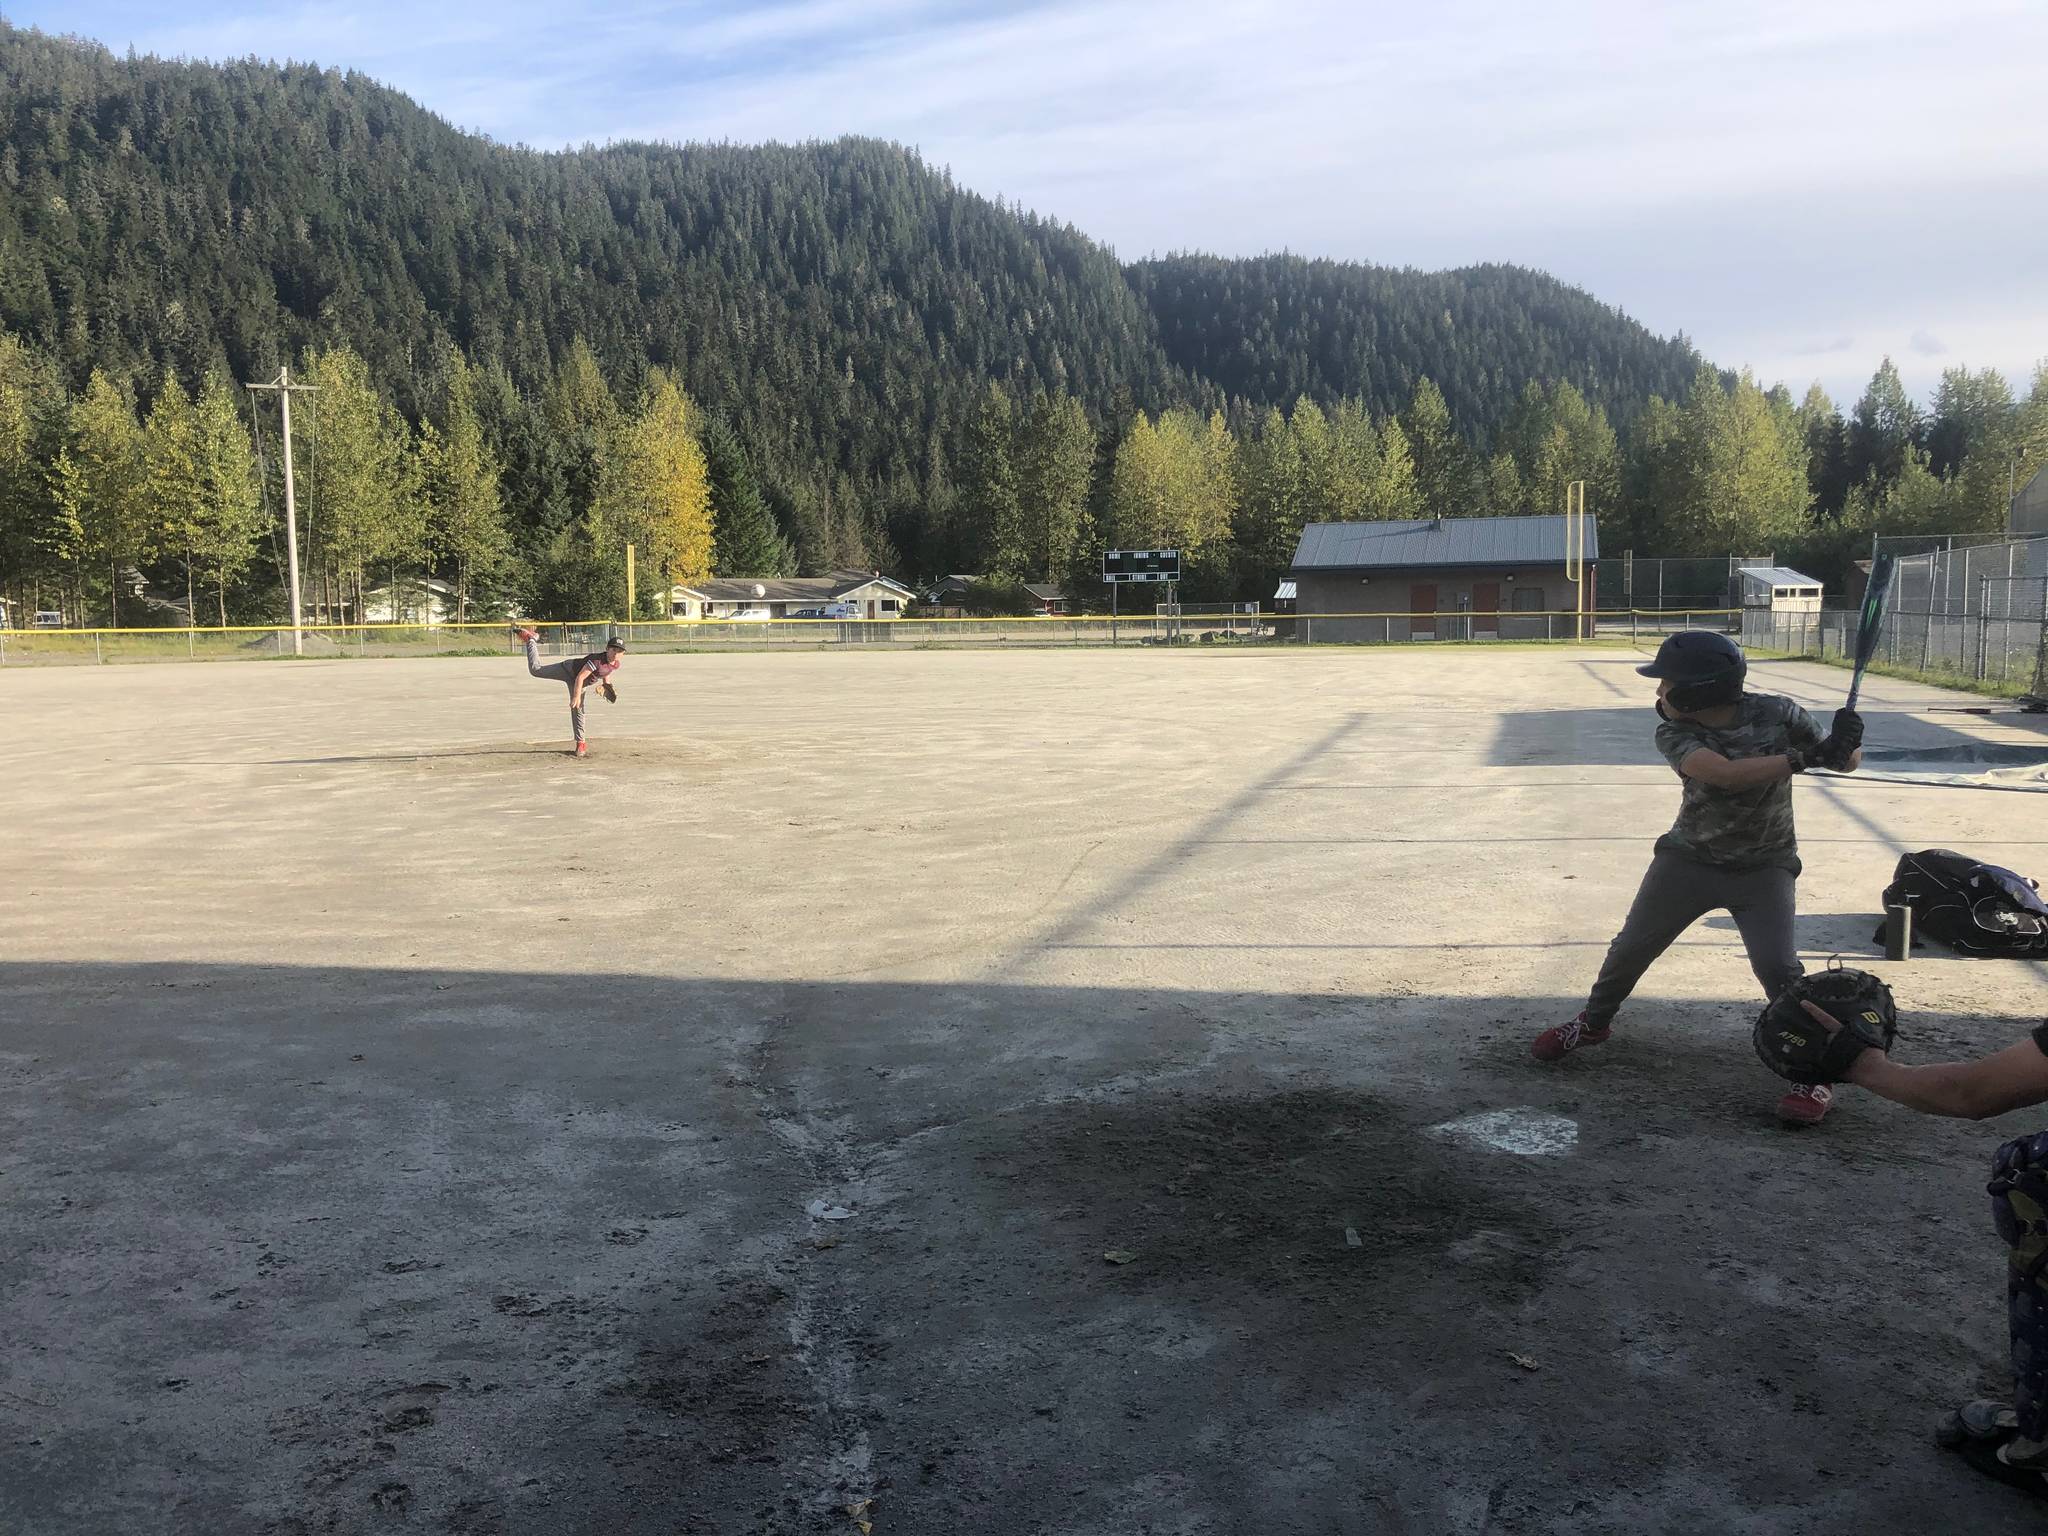 Youths play sandlot baseball at Miller Field in the summer of 2020. After COVID-19 sidelined a competitive season last summer, local players gathered to play sandlot ball. Thanks to a city-approved COVID-19 mitigation plan, the Gastineau Channel Baseball and Softball Leagues are planning a full, competitive season this summer. Registration is now open for players between the ages of 5 and 16. (Courtesy photo/Geoff Kirsch)